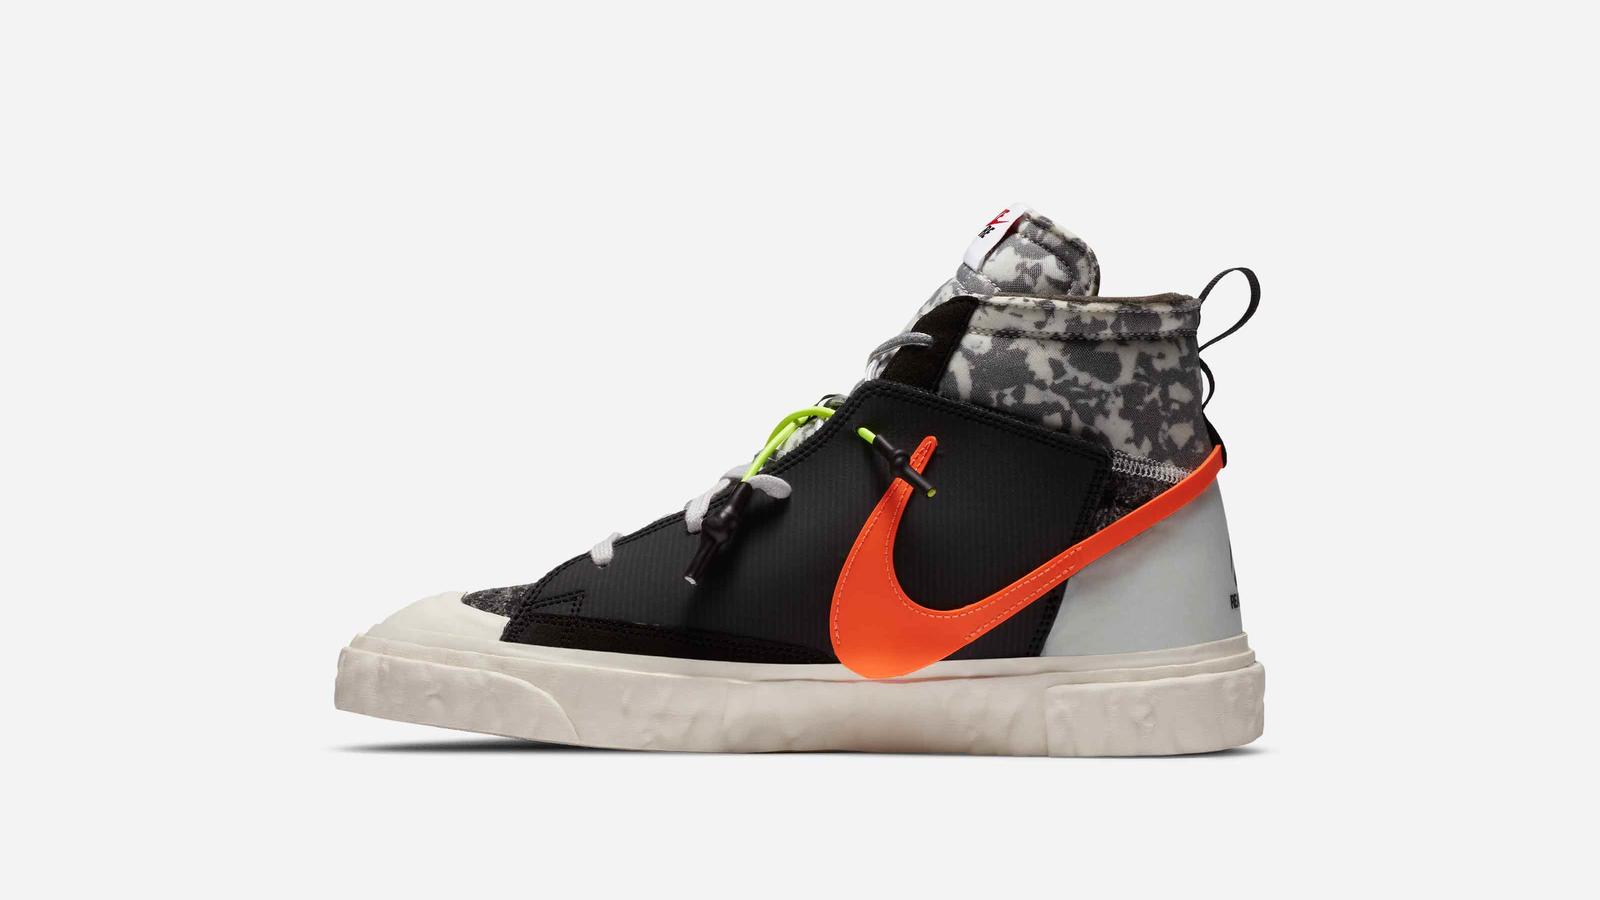 Nike x READYMADE Blazer Mid Official Image Release Date